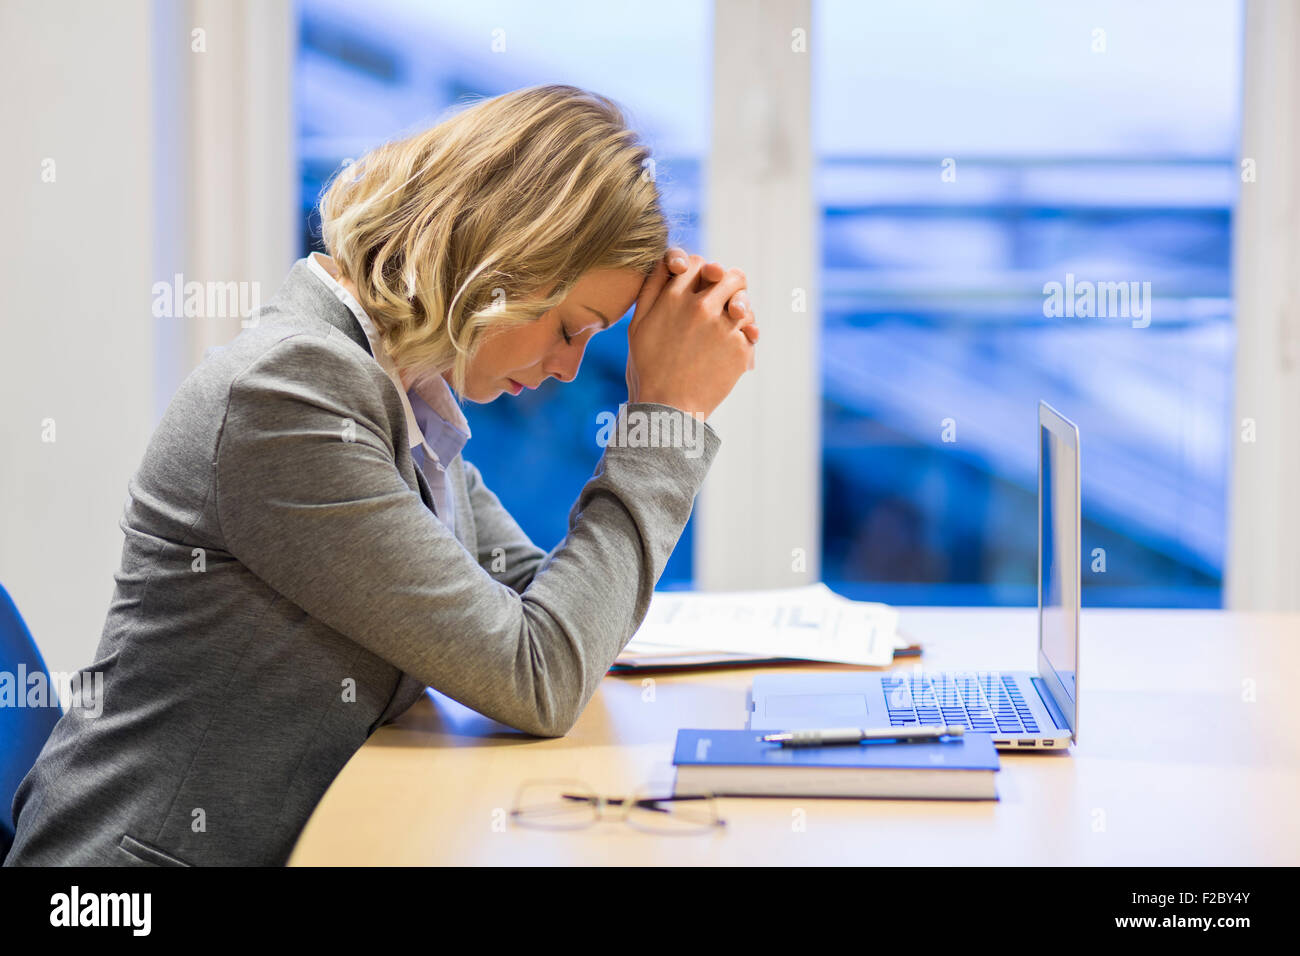 pensive business woman sitting in office, hands on forehead Stock Photo